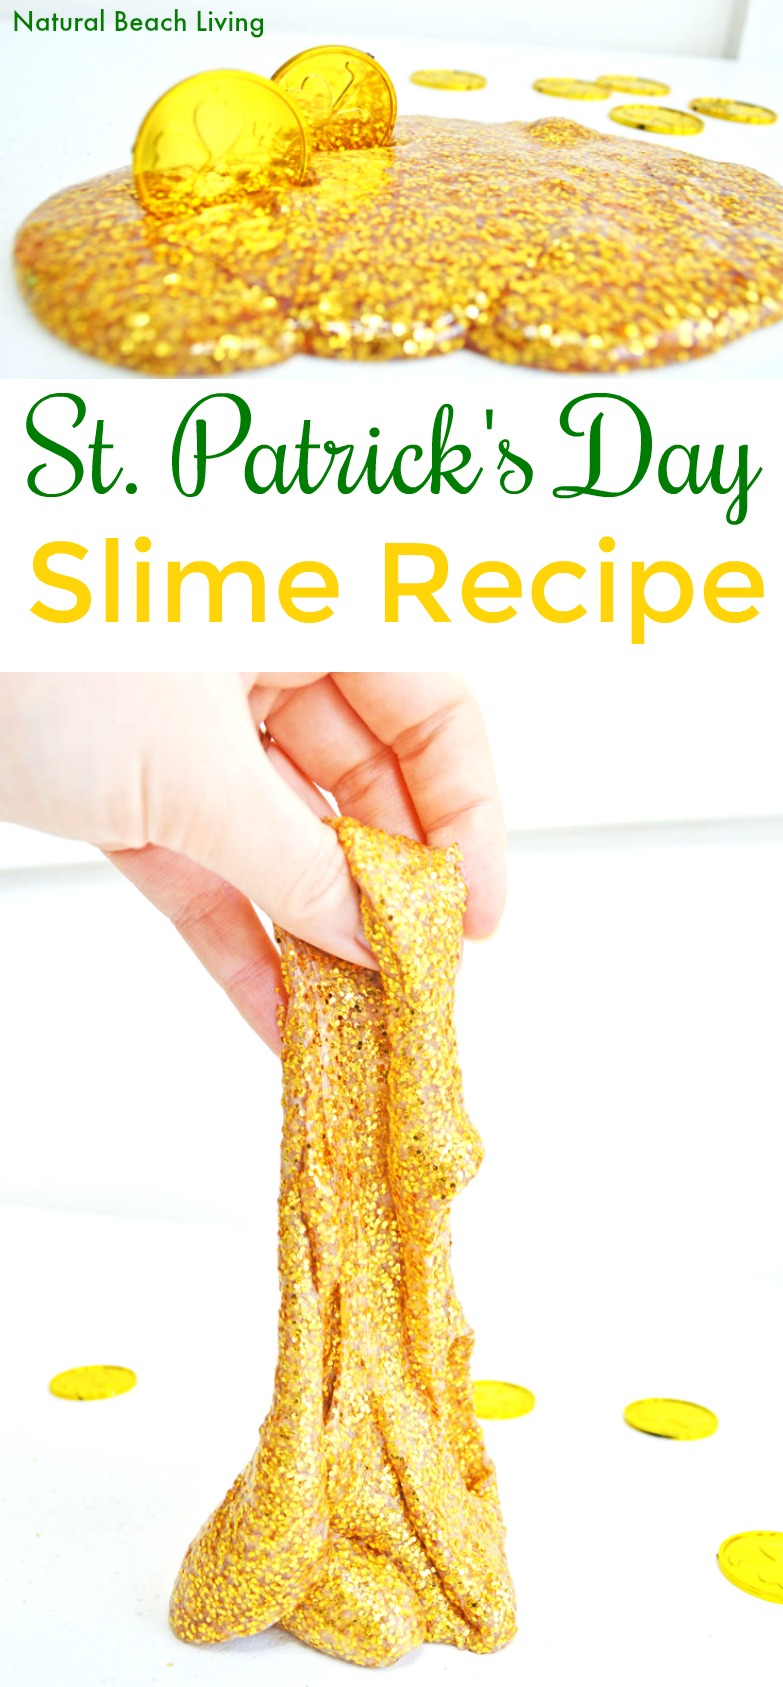 How to Make Slime Recipe with Contact Solution Kids Loves, Gold Glitter Slime, Gold Glitter Contact Solution Slime Recipe or Saline Solution slime with glue! One of the Best Sensory Play for Kids, St. Patrick's Day Slime Recipe, Homemade slime is super easy to make with our slime recipes. The Best Ways to Make Slime, Easy Slime Recipe with Baking Soda #slime #slimerecipe #slimerecipes #stpatricksday #stpatricksdaysensoryplay